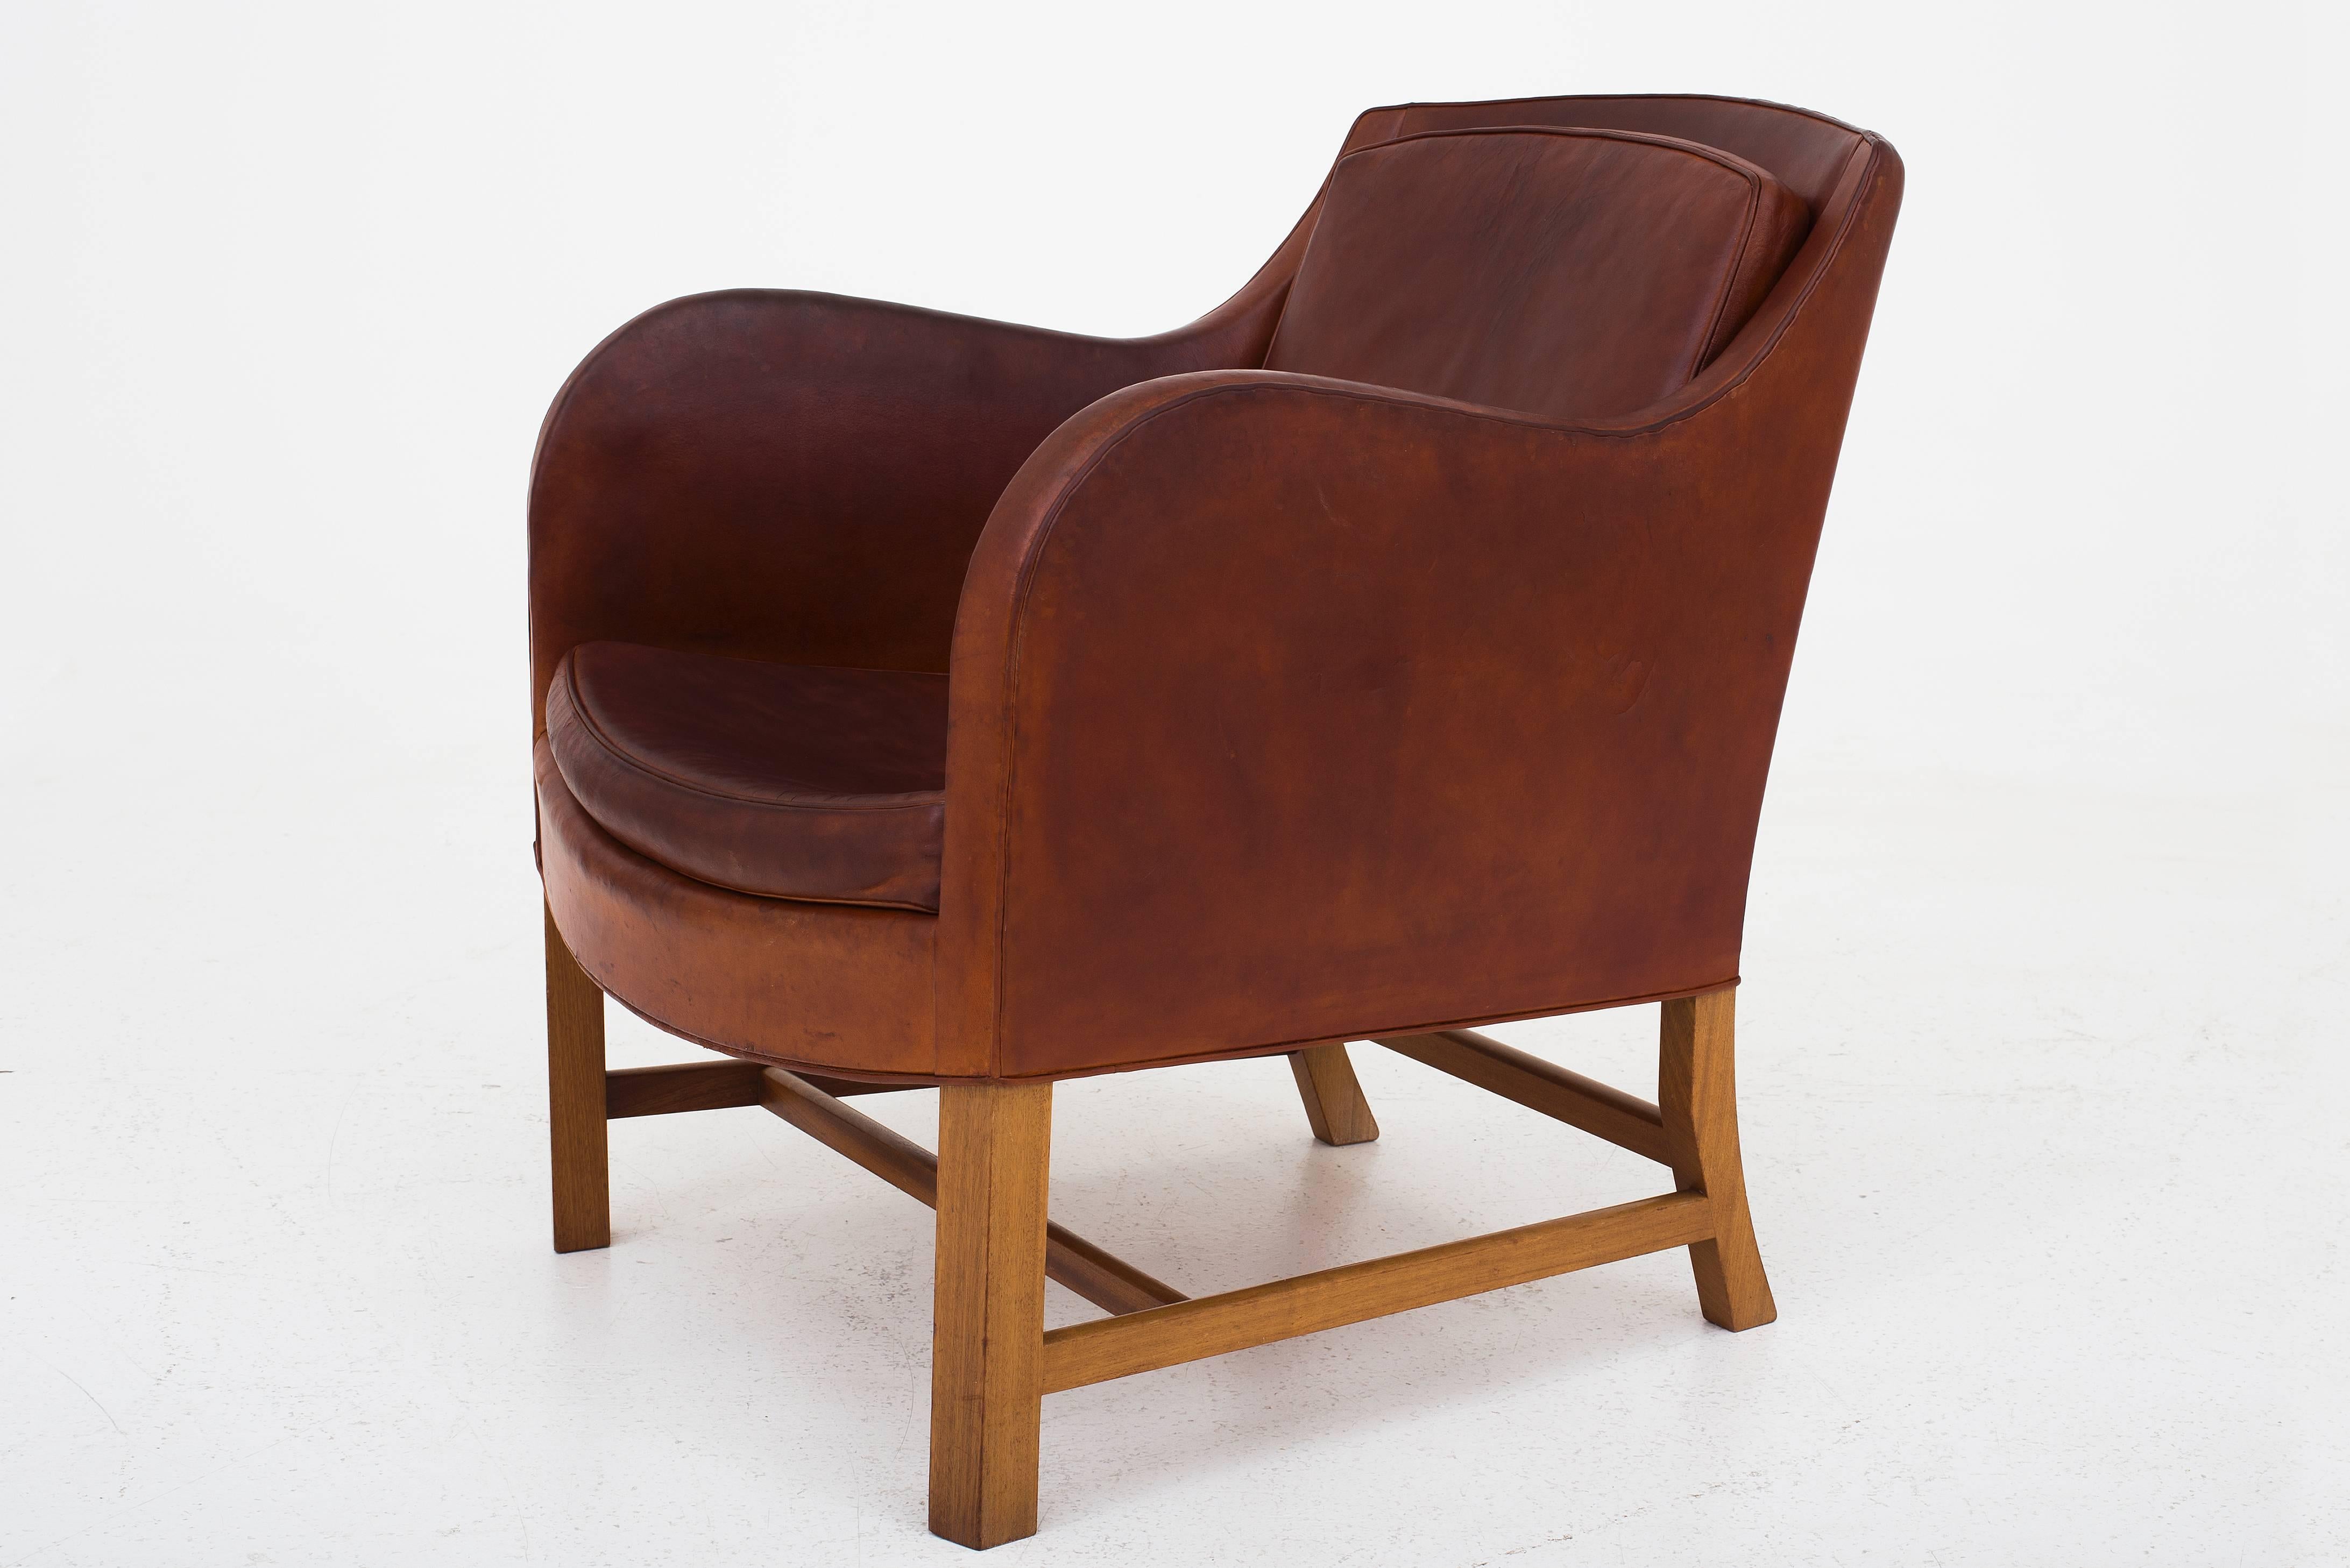 Mix chair model 4396A in patinated natural leather and legs in light mahogany. Designed by Kaare Klint & Edvard Kindt-Larsen 1930. Maker Rud Rasmussen.